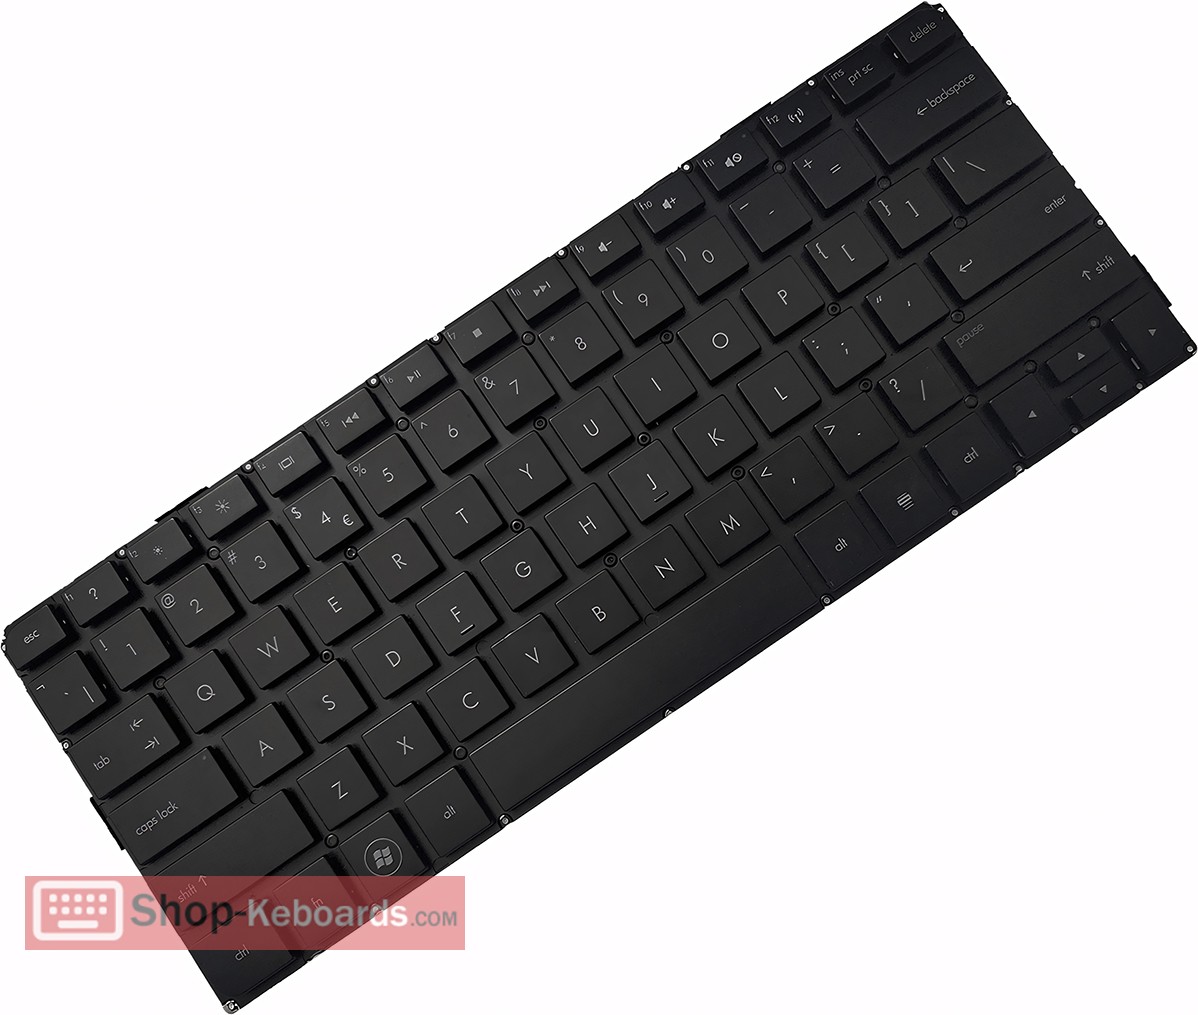 HP Envy 13-1070 SERIES Keyboard replacement